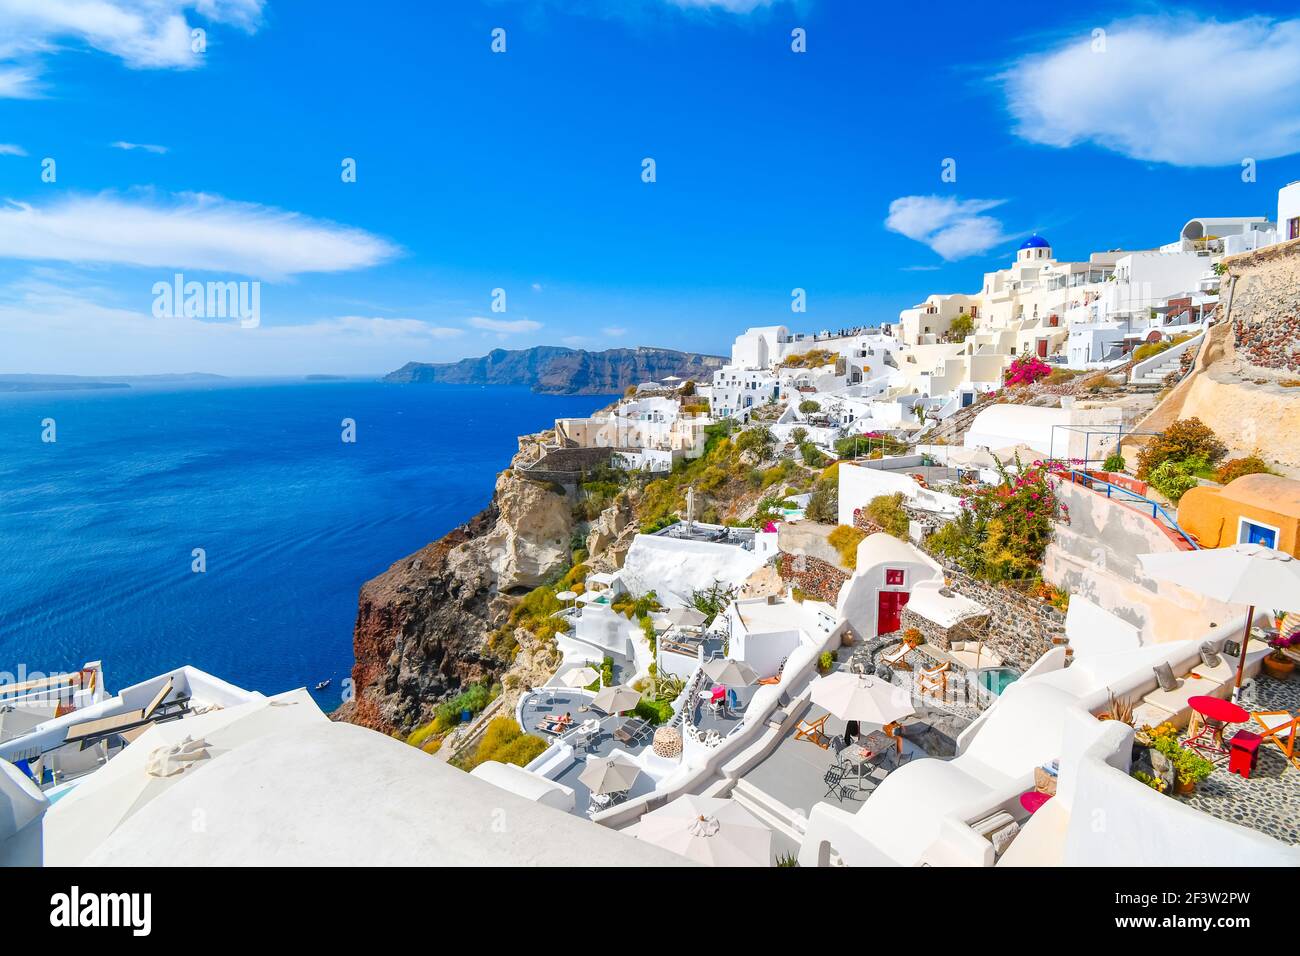 The steep cliffs of the caldera, the Aegean Sea and the whitewashed village of Oia with the Blue Dome Church in view on the island of Santorini Greece Stock Photo